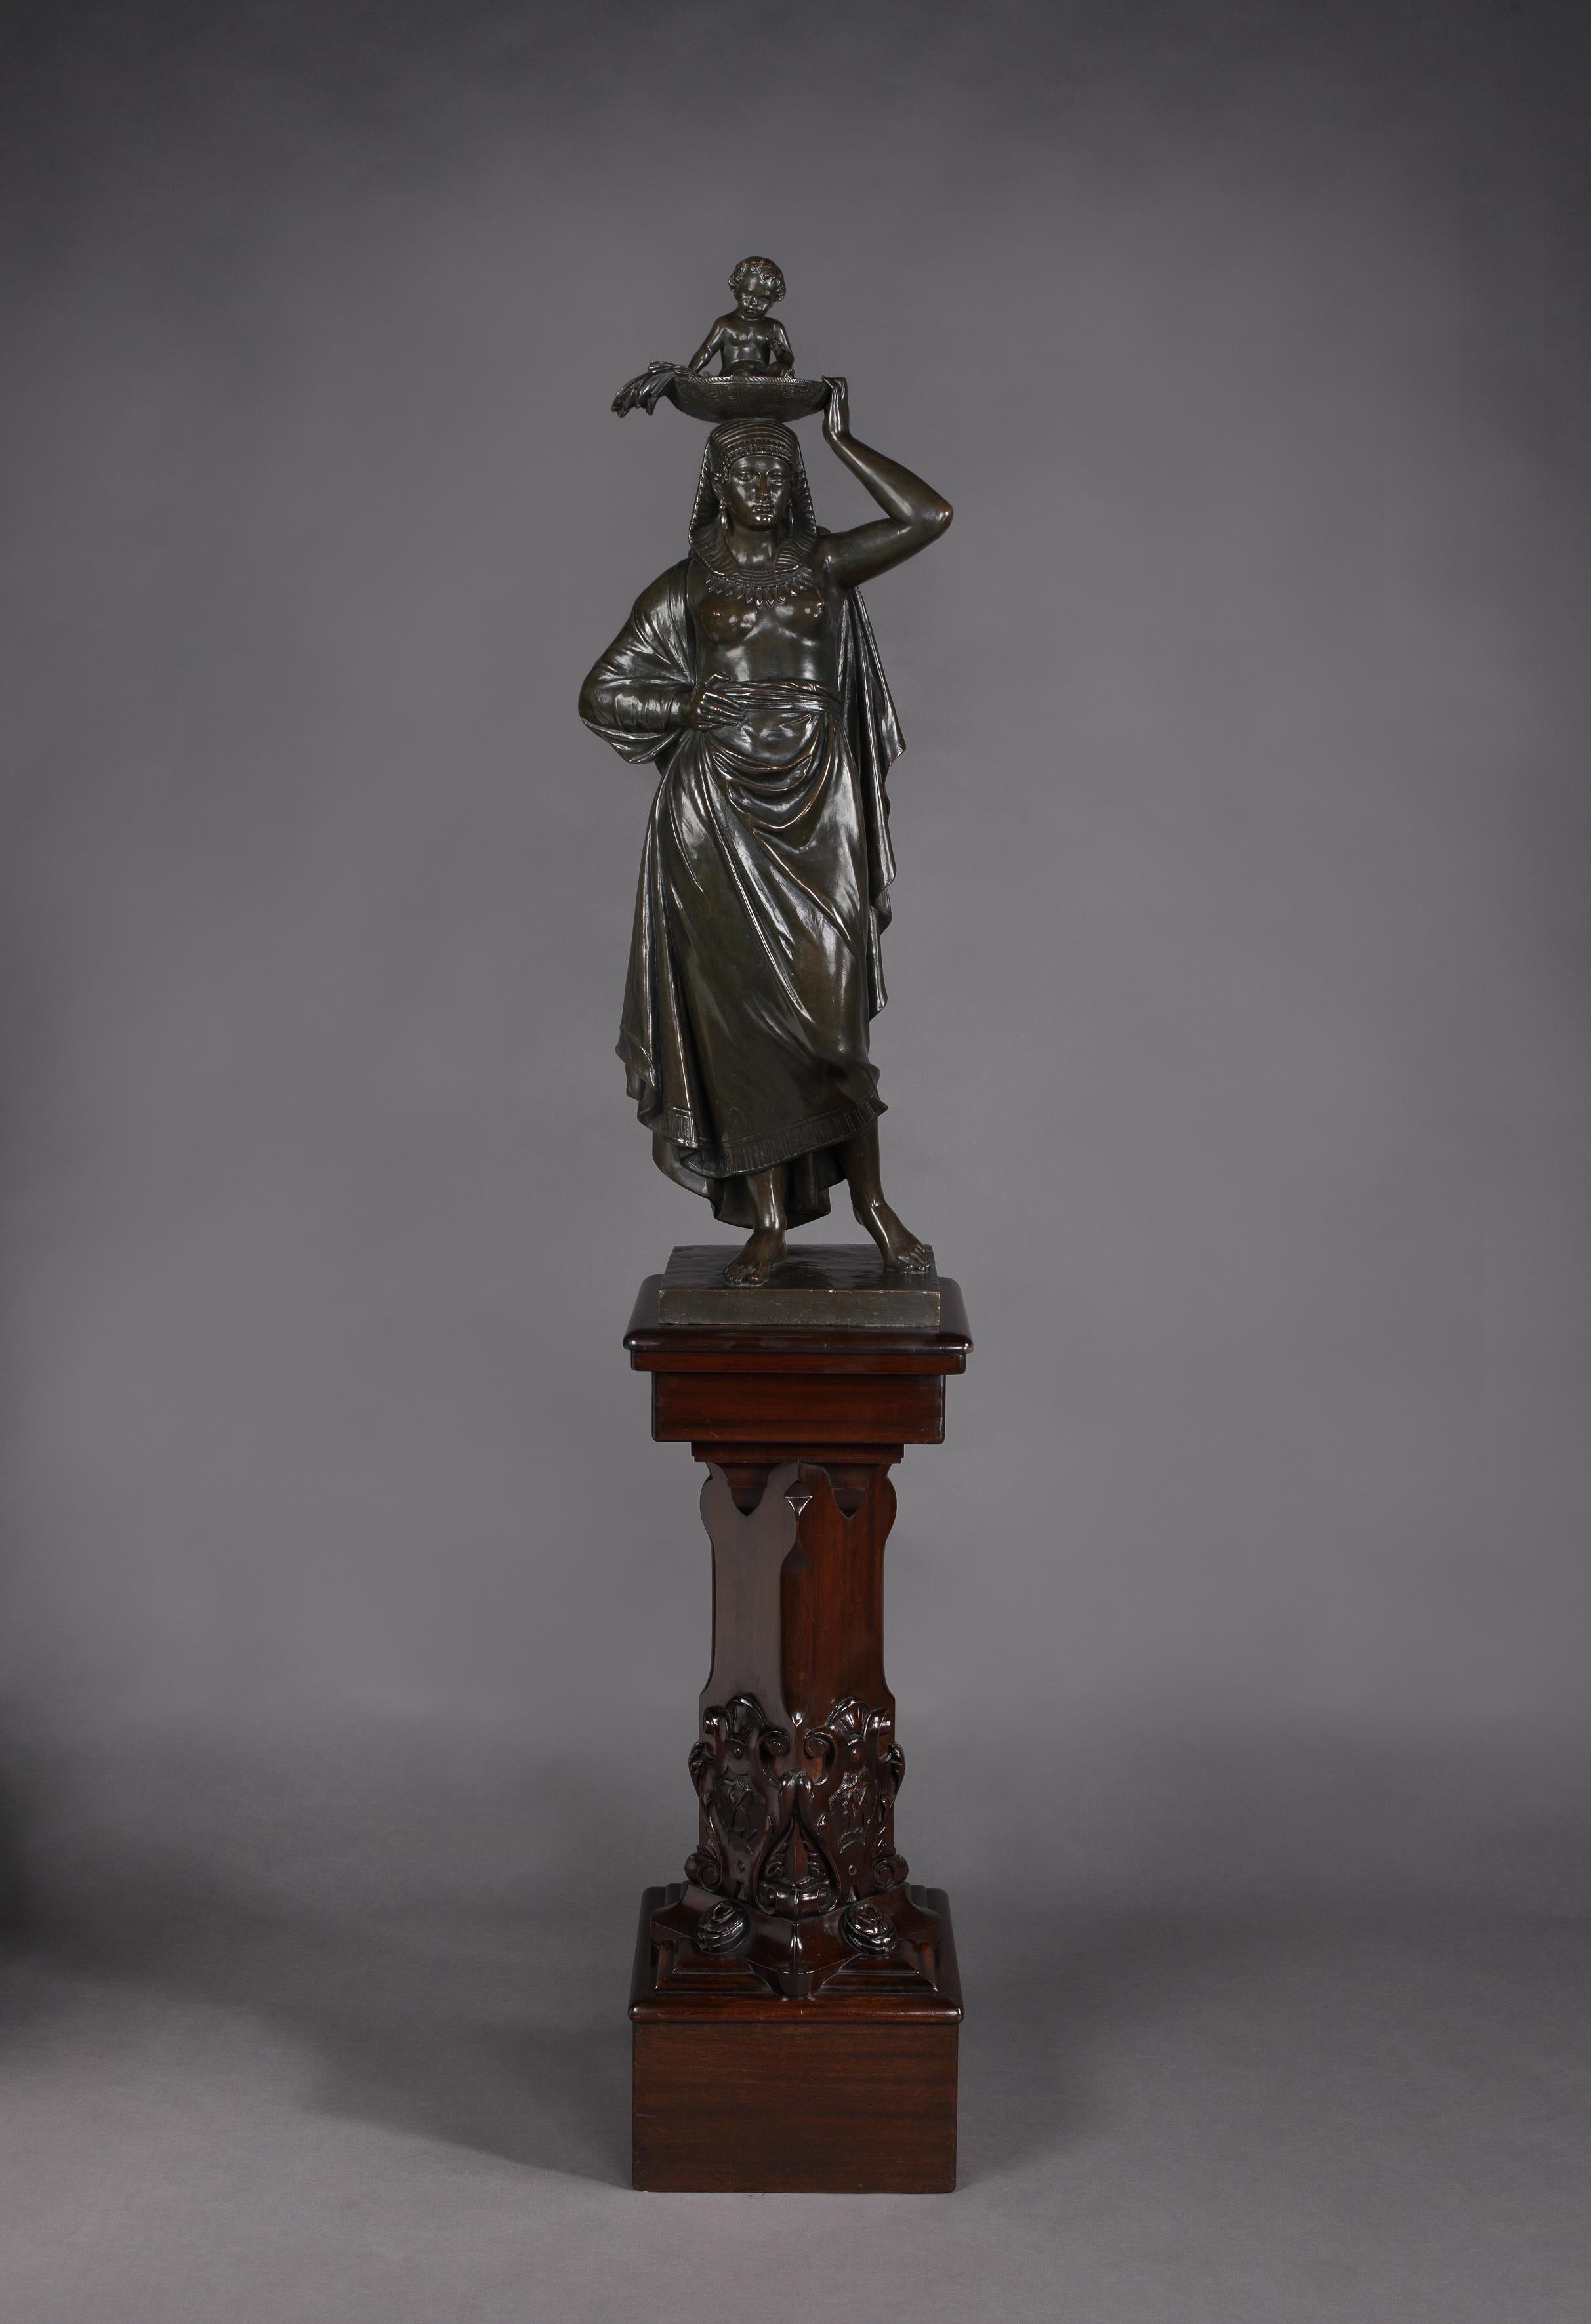 'Moses and Jochebed  - A Fine Patinated Bronze Figural Group After A Model by 'François Truphème', Cast by 'Thiebaut Frères'.

Signed 'Fois Truphème 1863' and 'fdu par Vor Thiebaut'. 

This impressive patinated bronze figure is raised on a carved